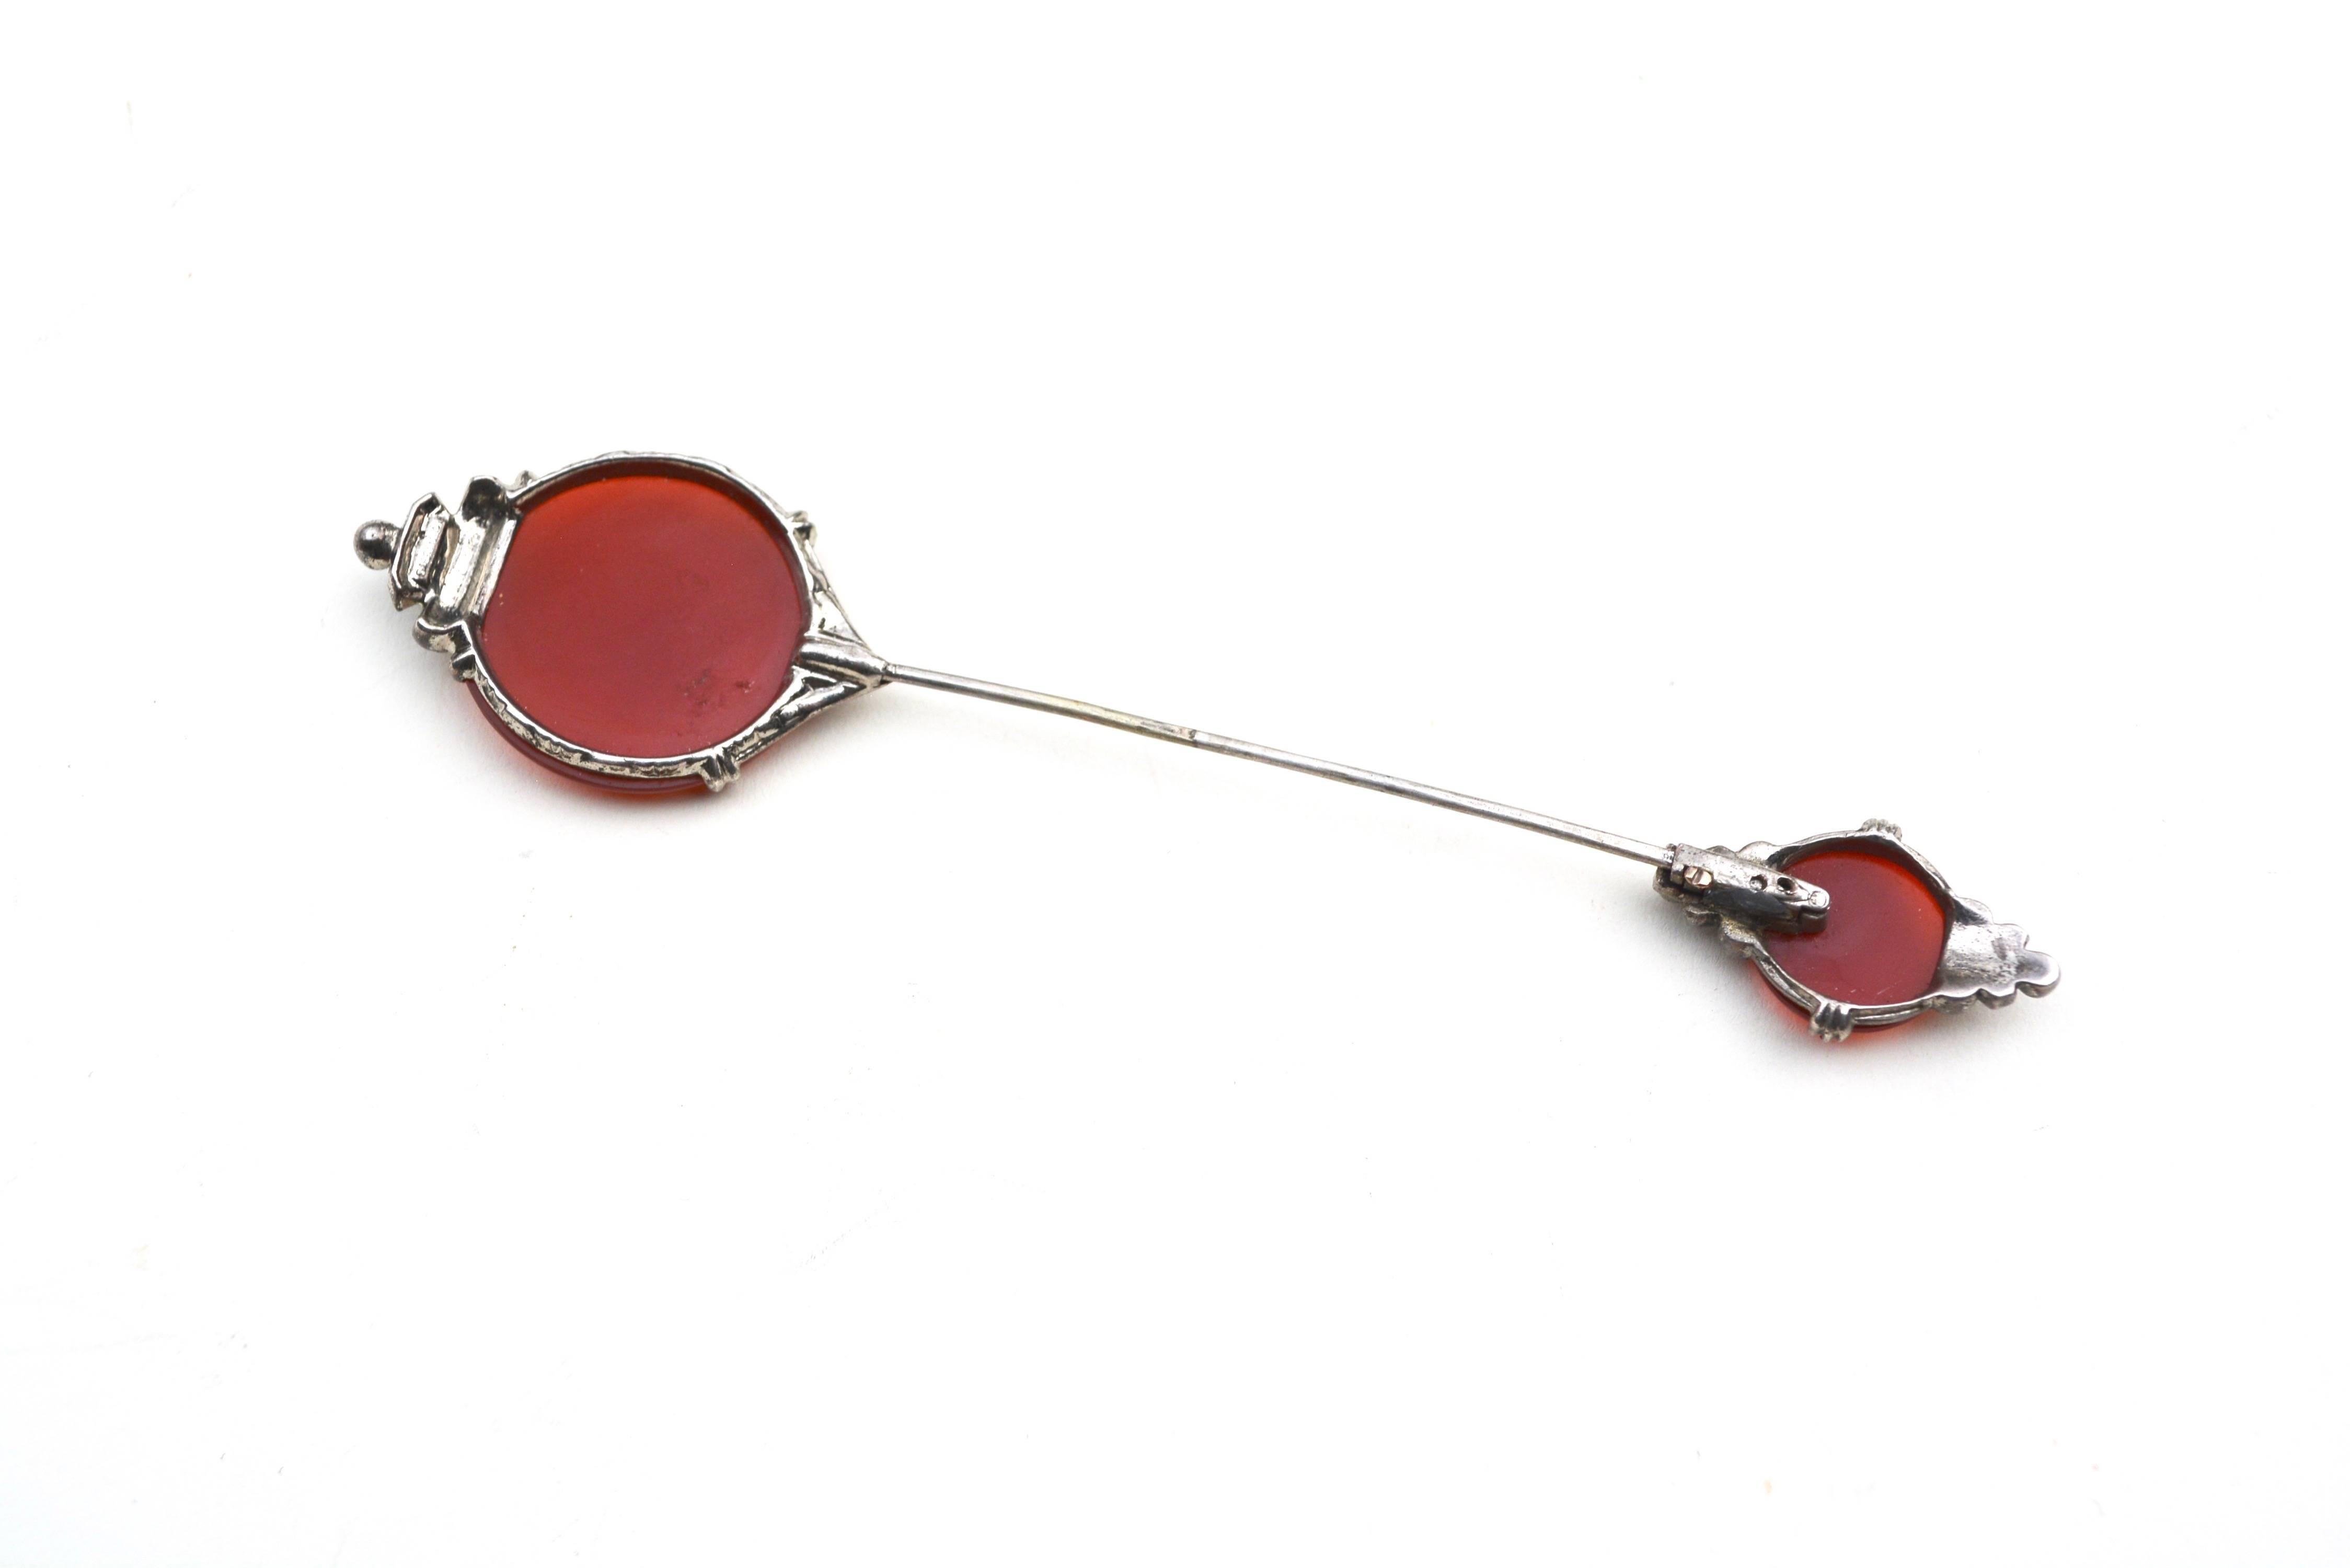 Hat pin made of sterling and marcasite details. Carnelian stones. Lovely example. Closes, but closure has some wear overall, yet stays closed. Stamped sterling. 4.5